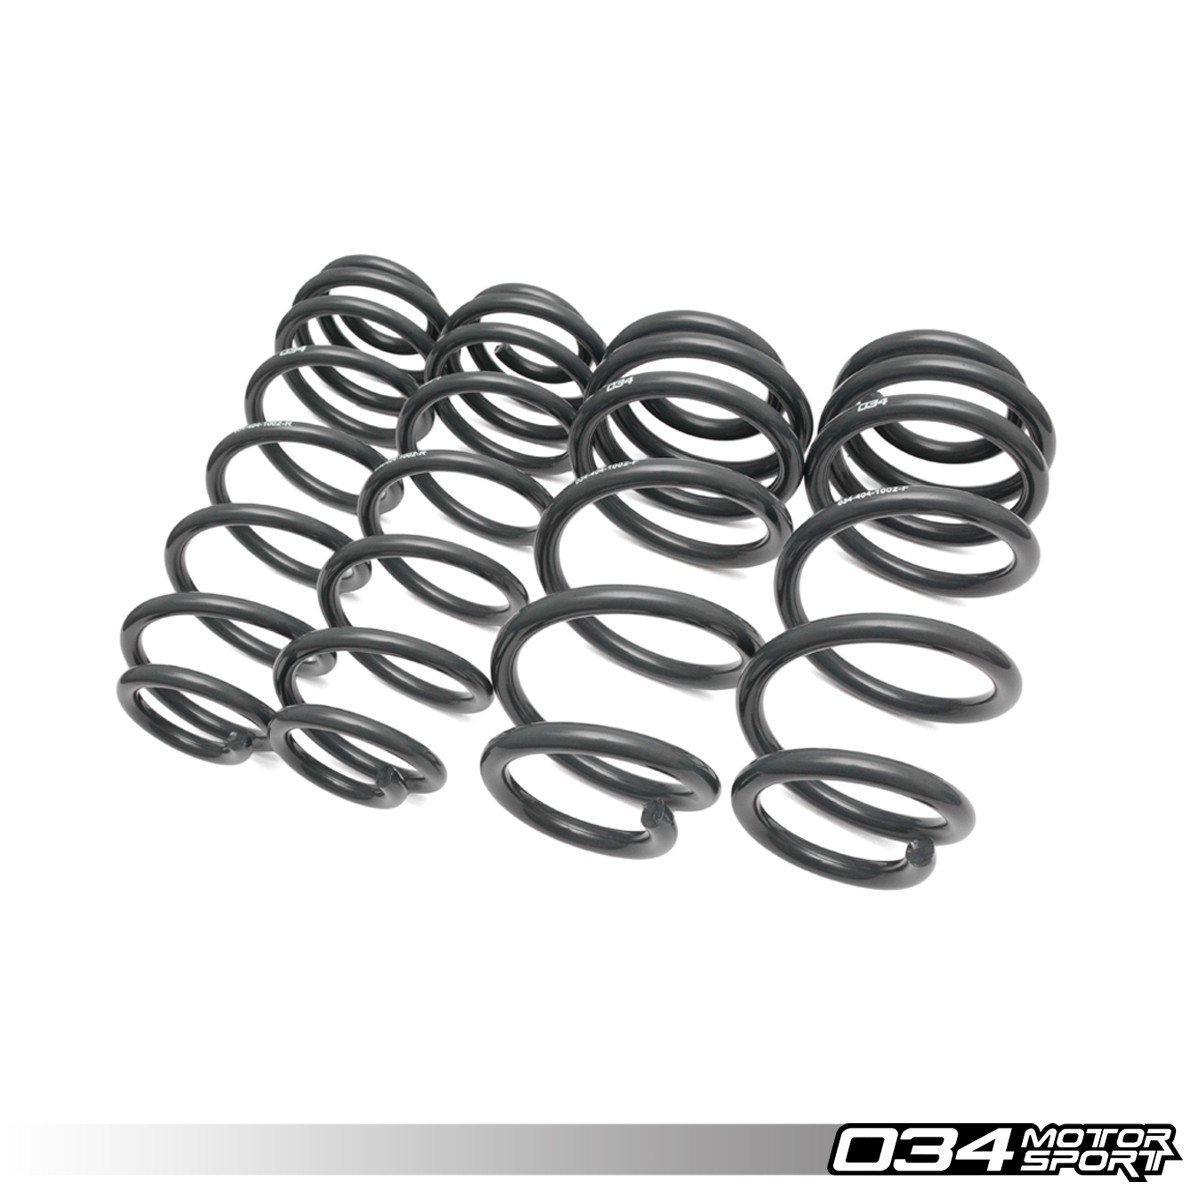 Dynamic+ Lowering Springs For B8/B8.5 Audi S4 3.0 TFSI-A Little Tuning Co